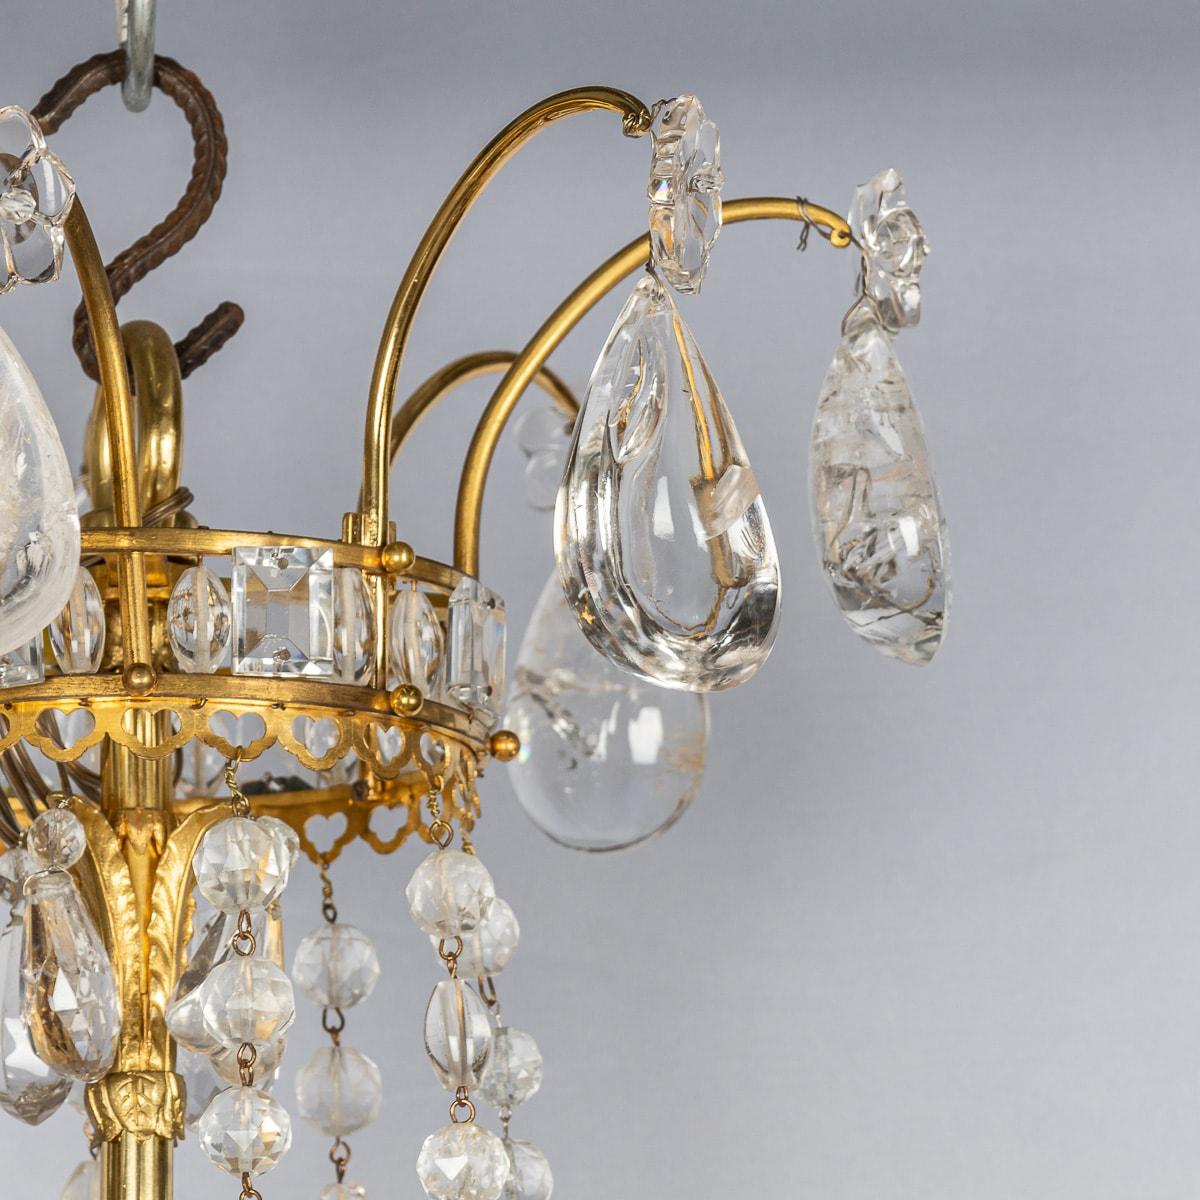 Other Antique 18th Century French Ormolu & Cut Rock Crystal Chandelier c.1770 For Sale